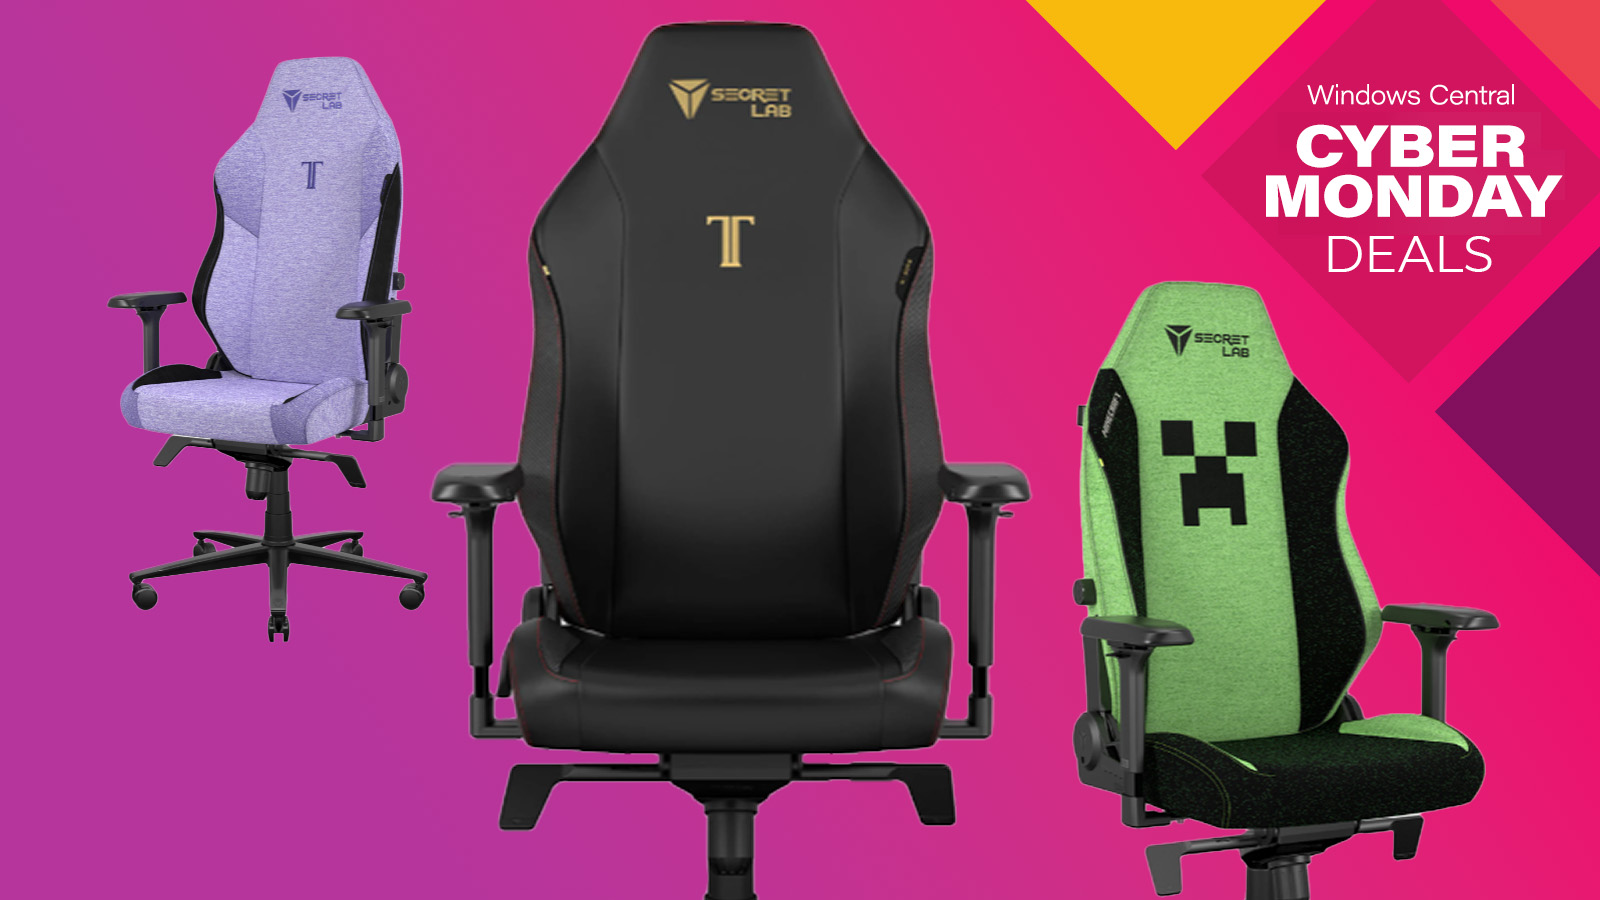 SecretLab's monster gaming chair sale for Cyber Monday is now on